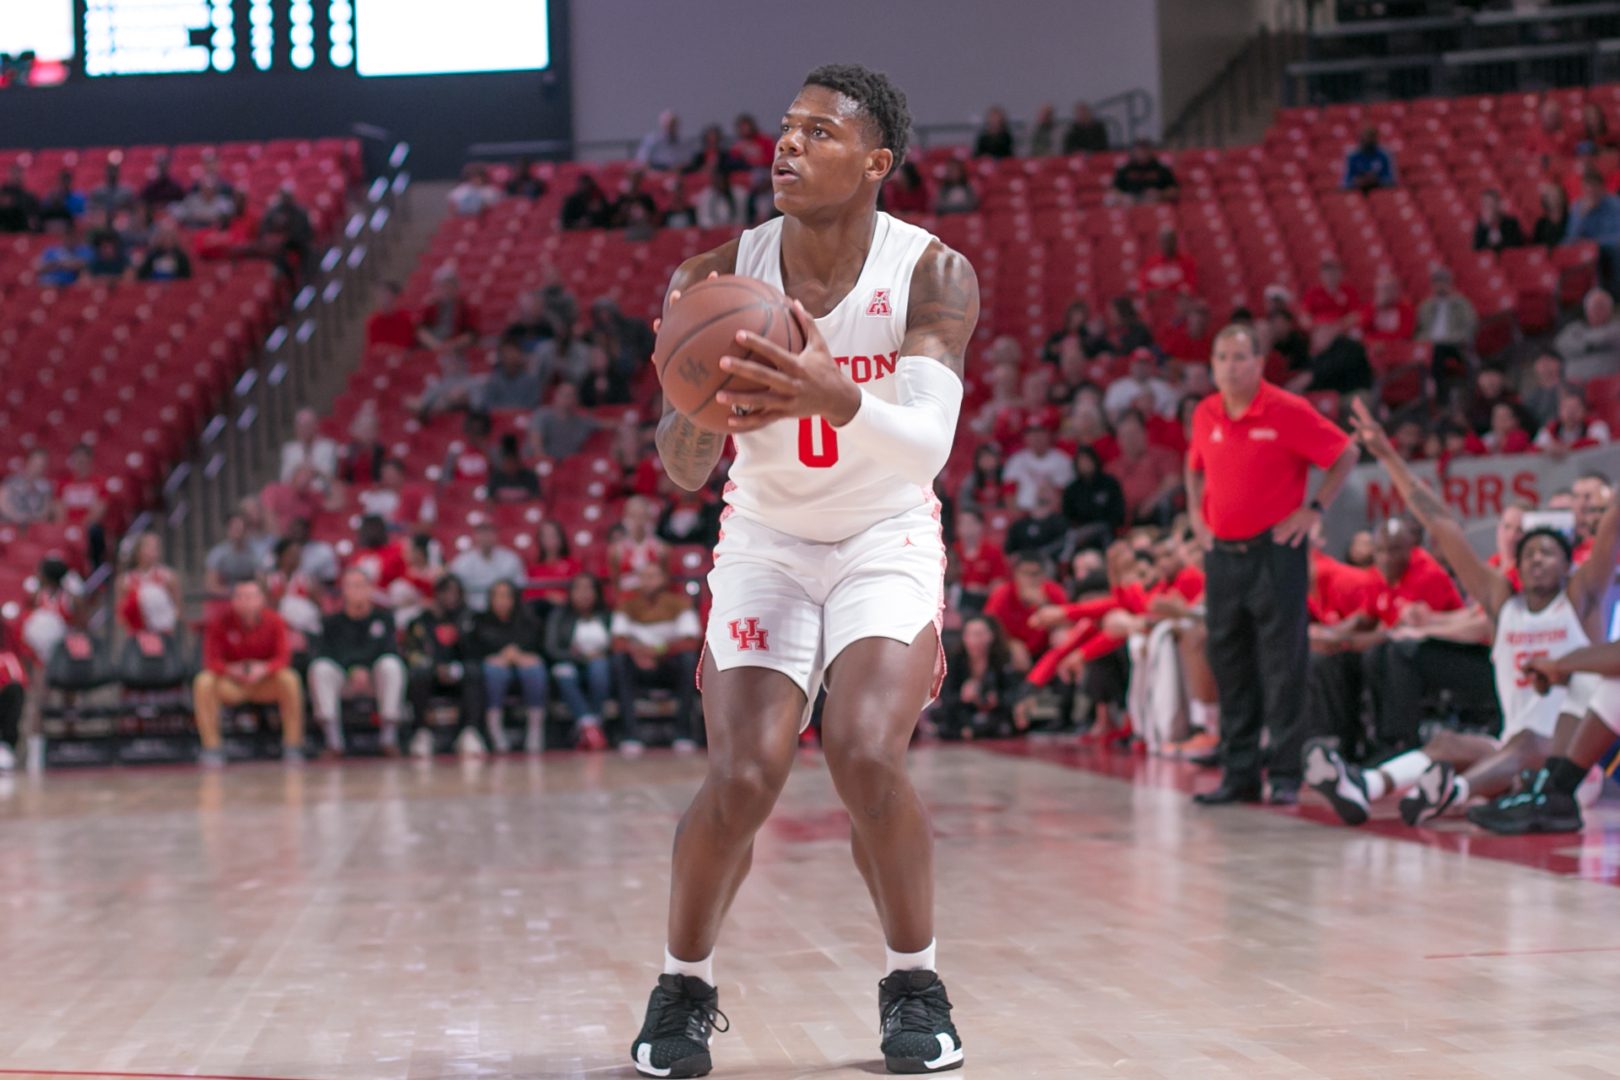 Freshman guard Marcus Sasser lit up Angelo State on offense, dropping a game-high 17 points en route to a 106-42 UH win Saturday night at Fertitta Center. | Trevor Nolley/The Cougar